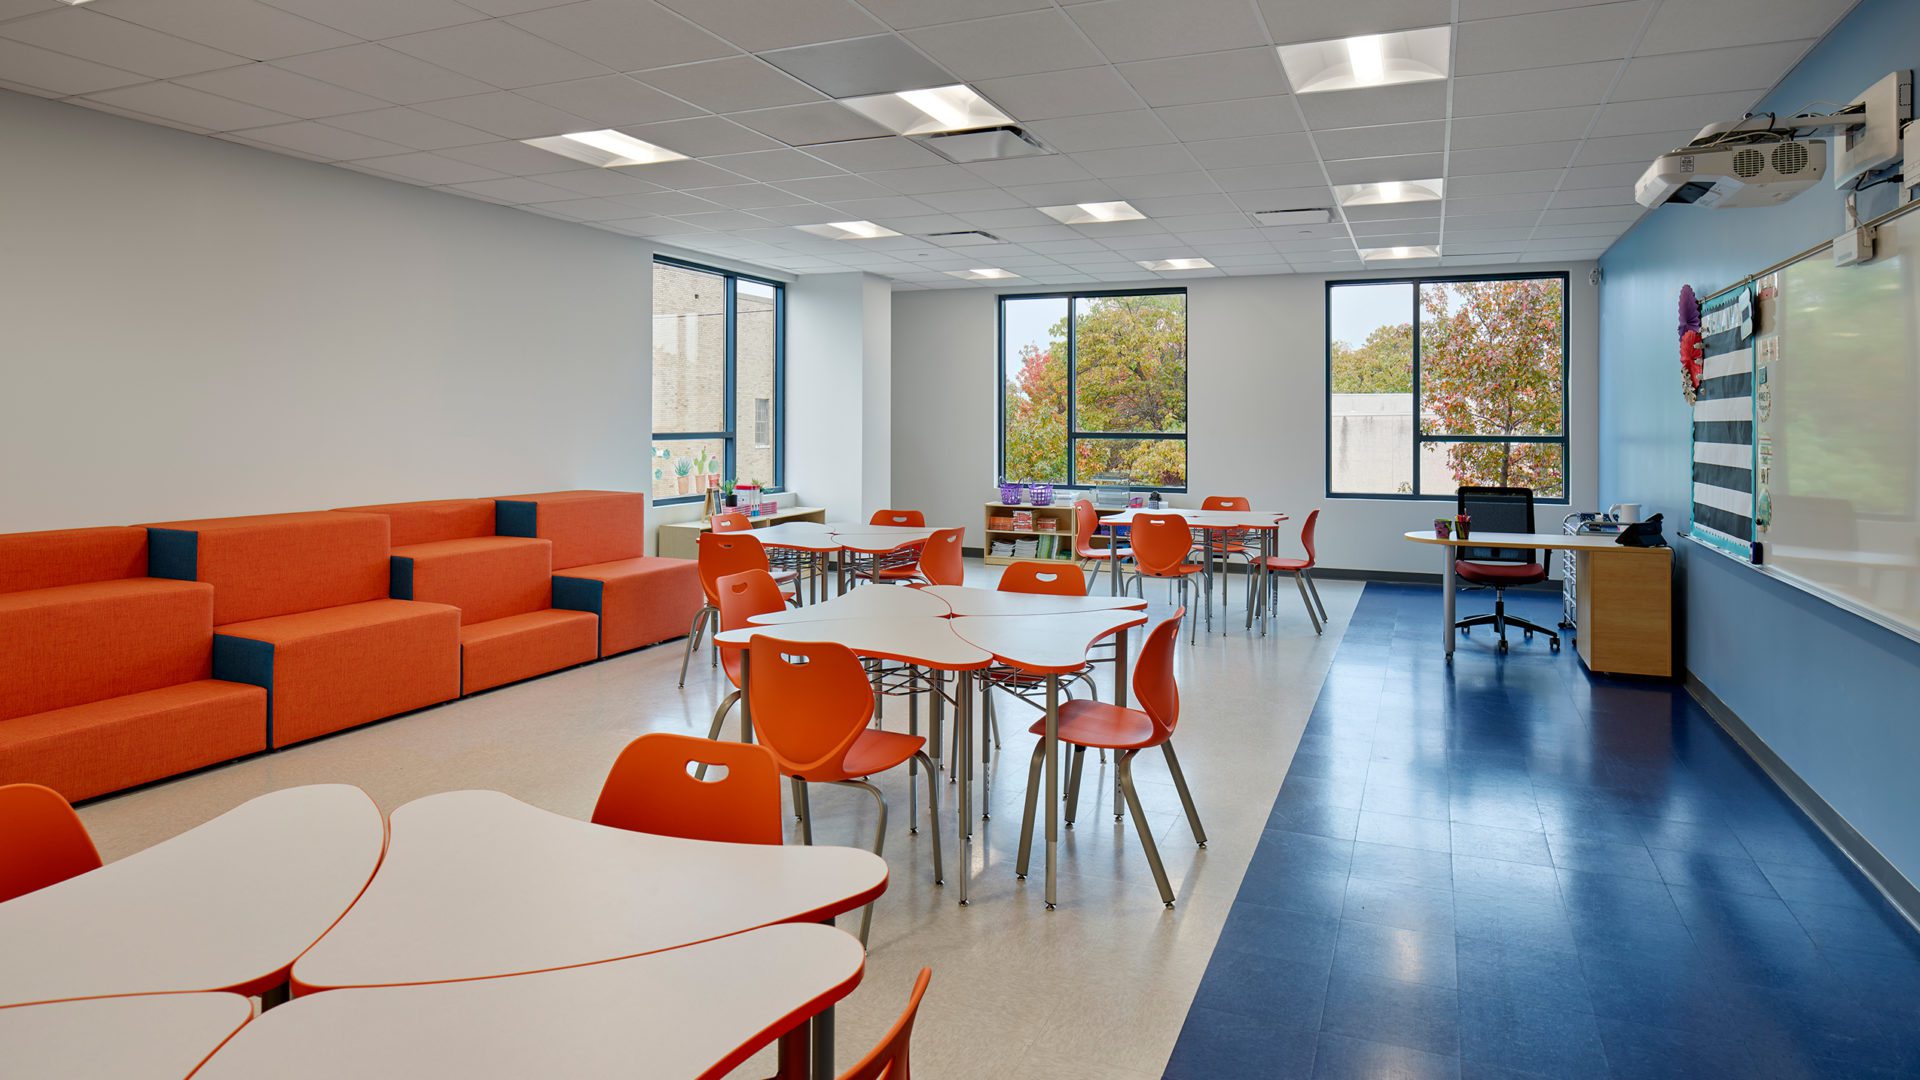 school room with white tables and orange chairs. comfy orange seats line the wall and the windows are big and bright